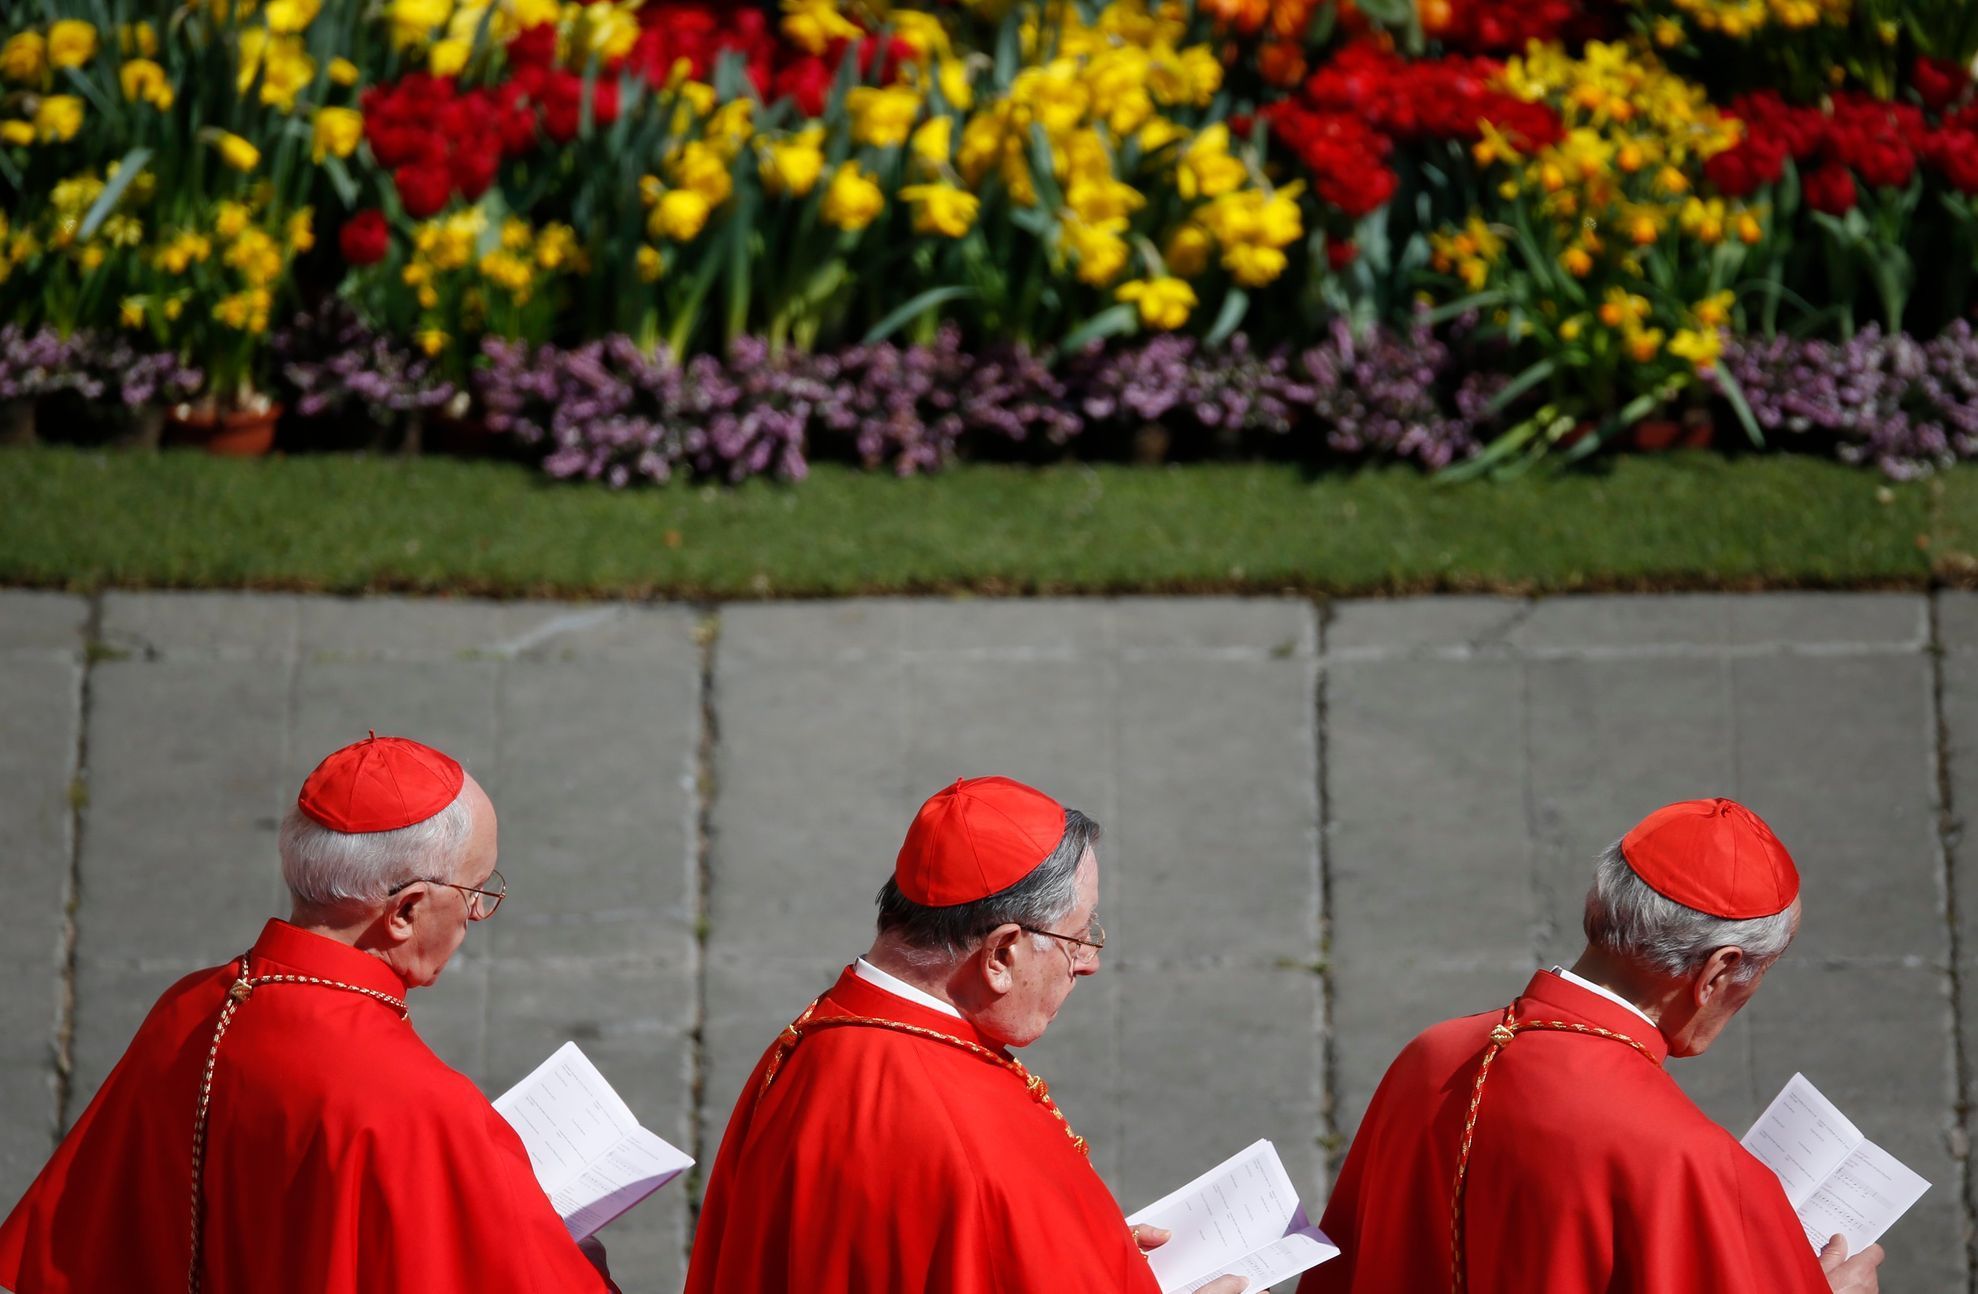 Cardinals attend the Easter Mass led by Pope Francis in Saint Peter's Square at the Vatican